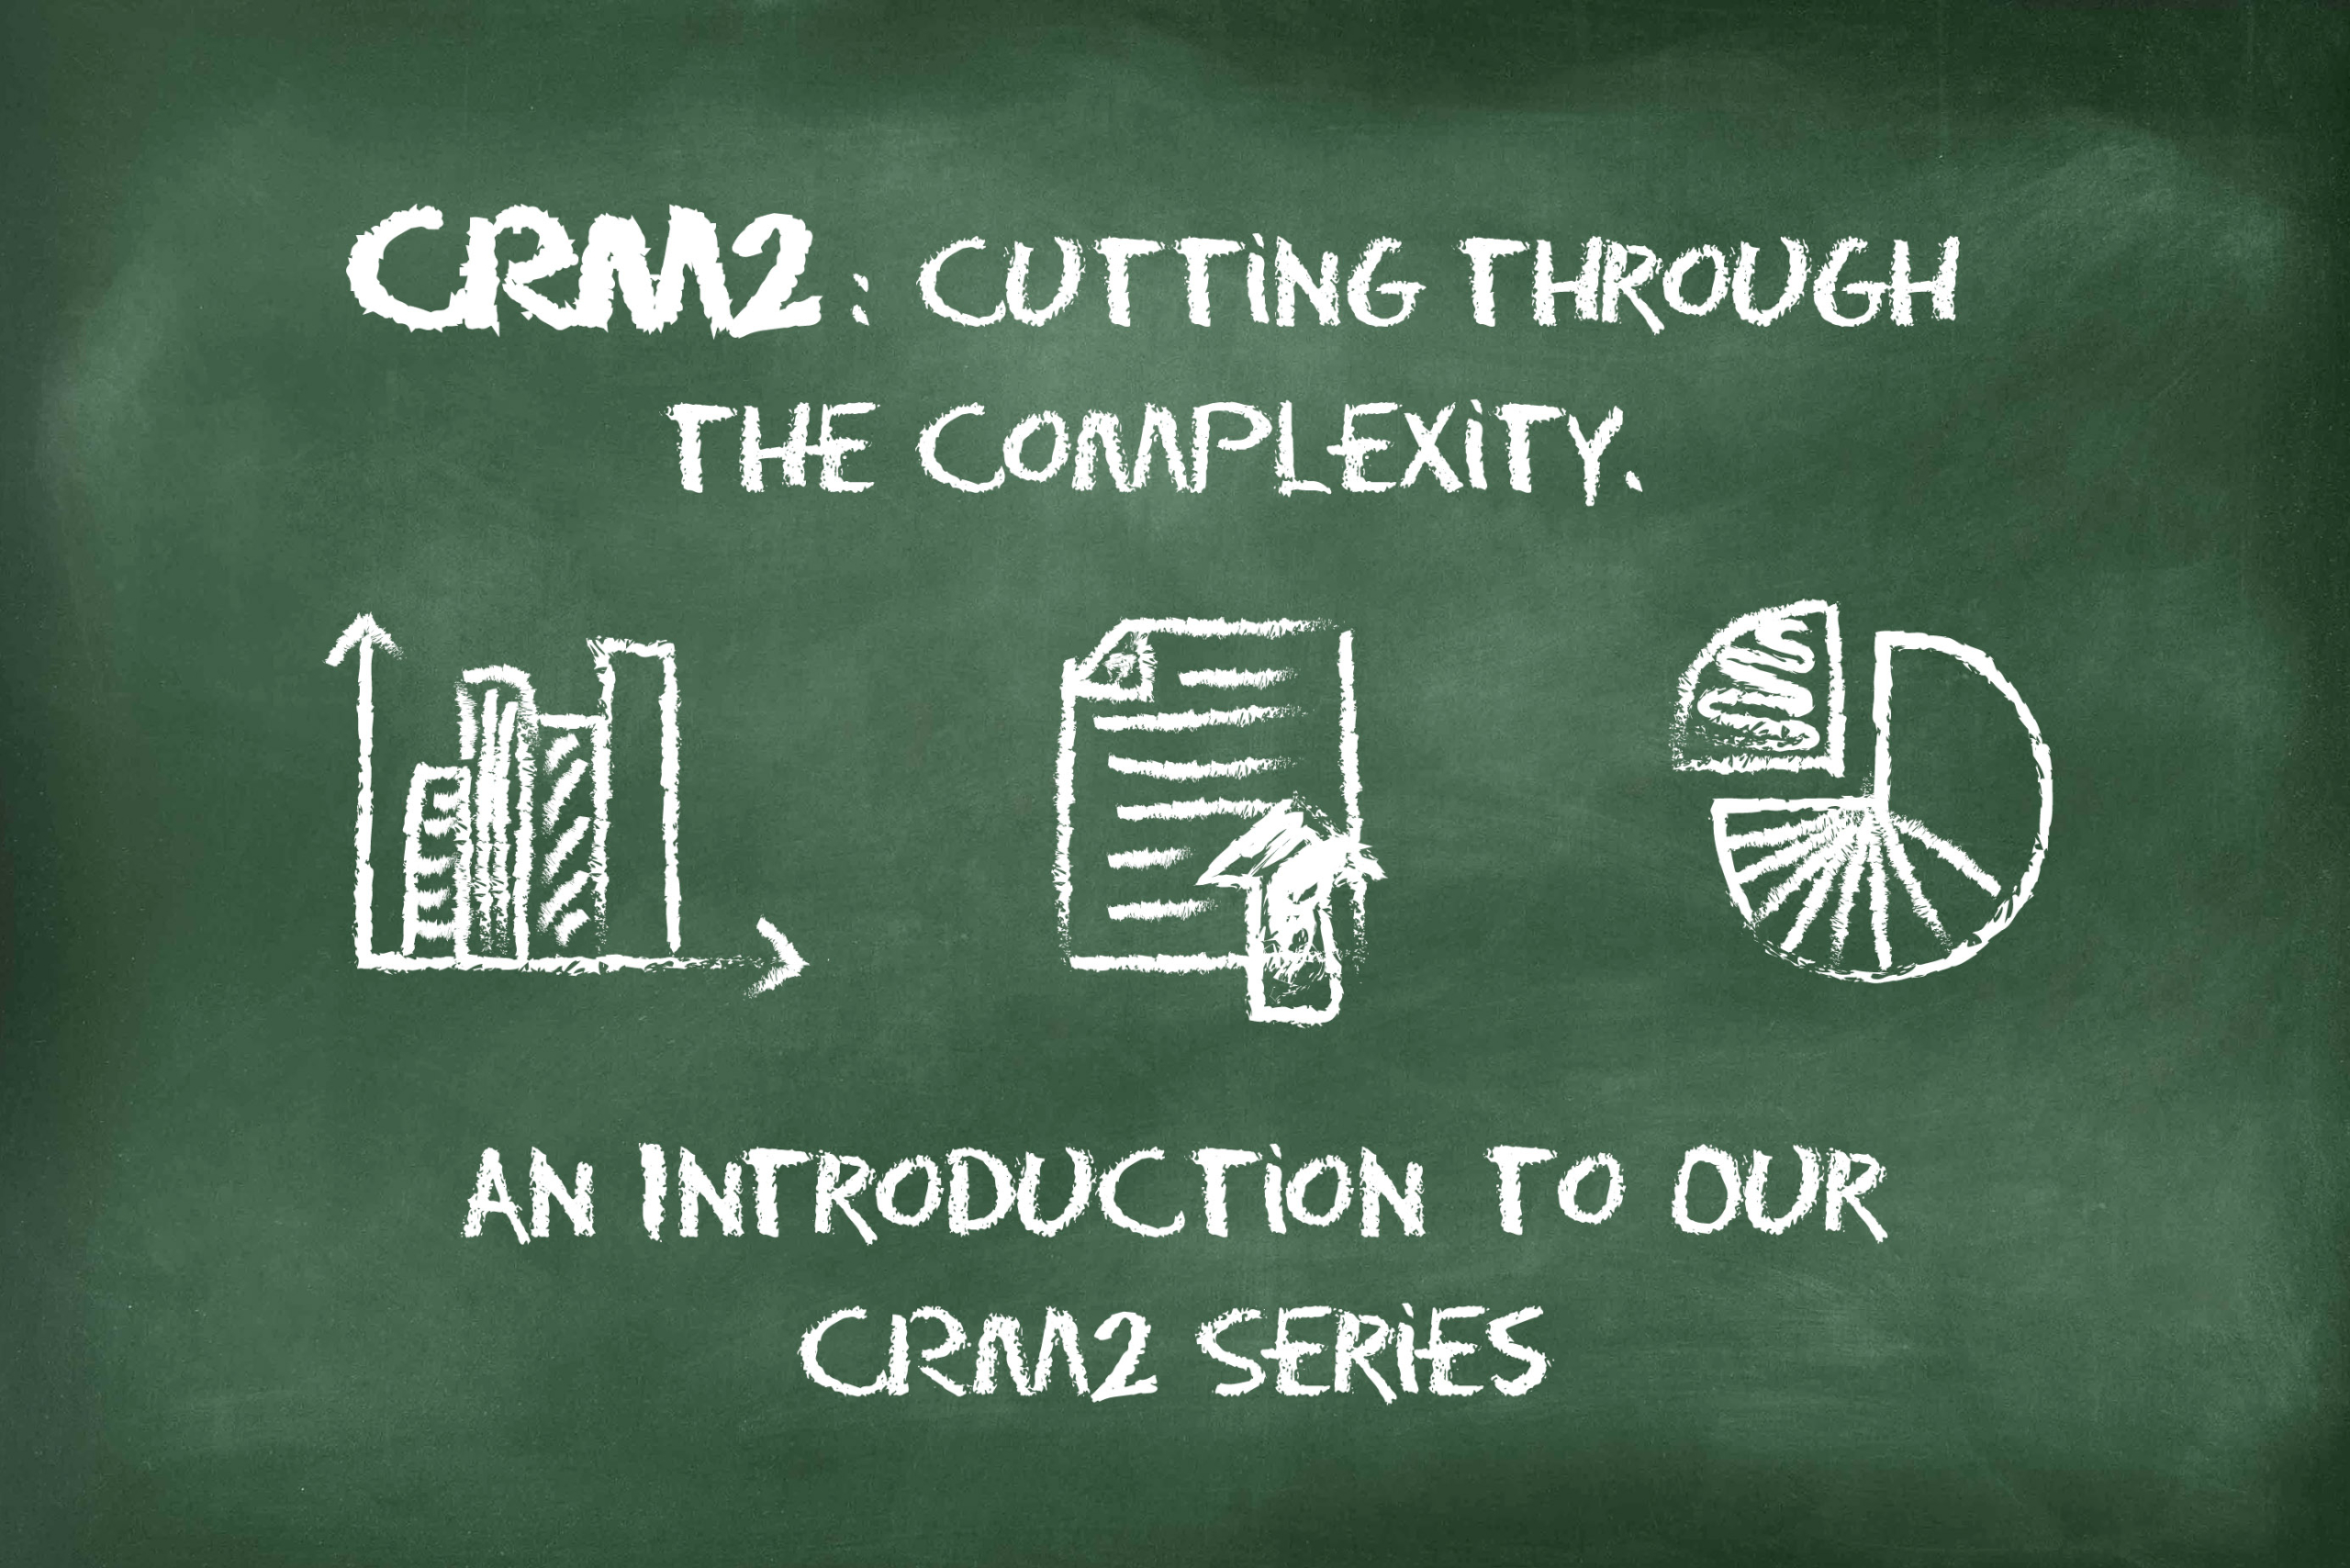 CRM2: Cutting Through the Complexity